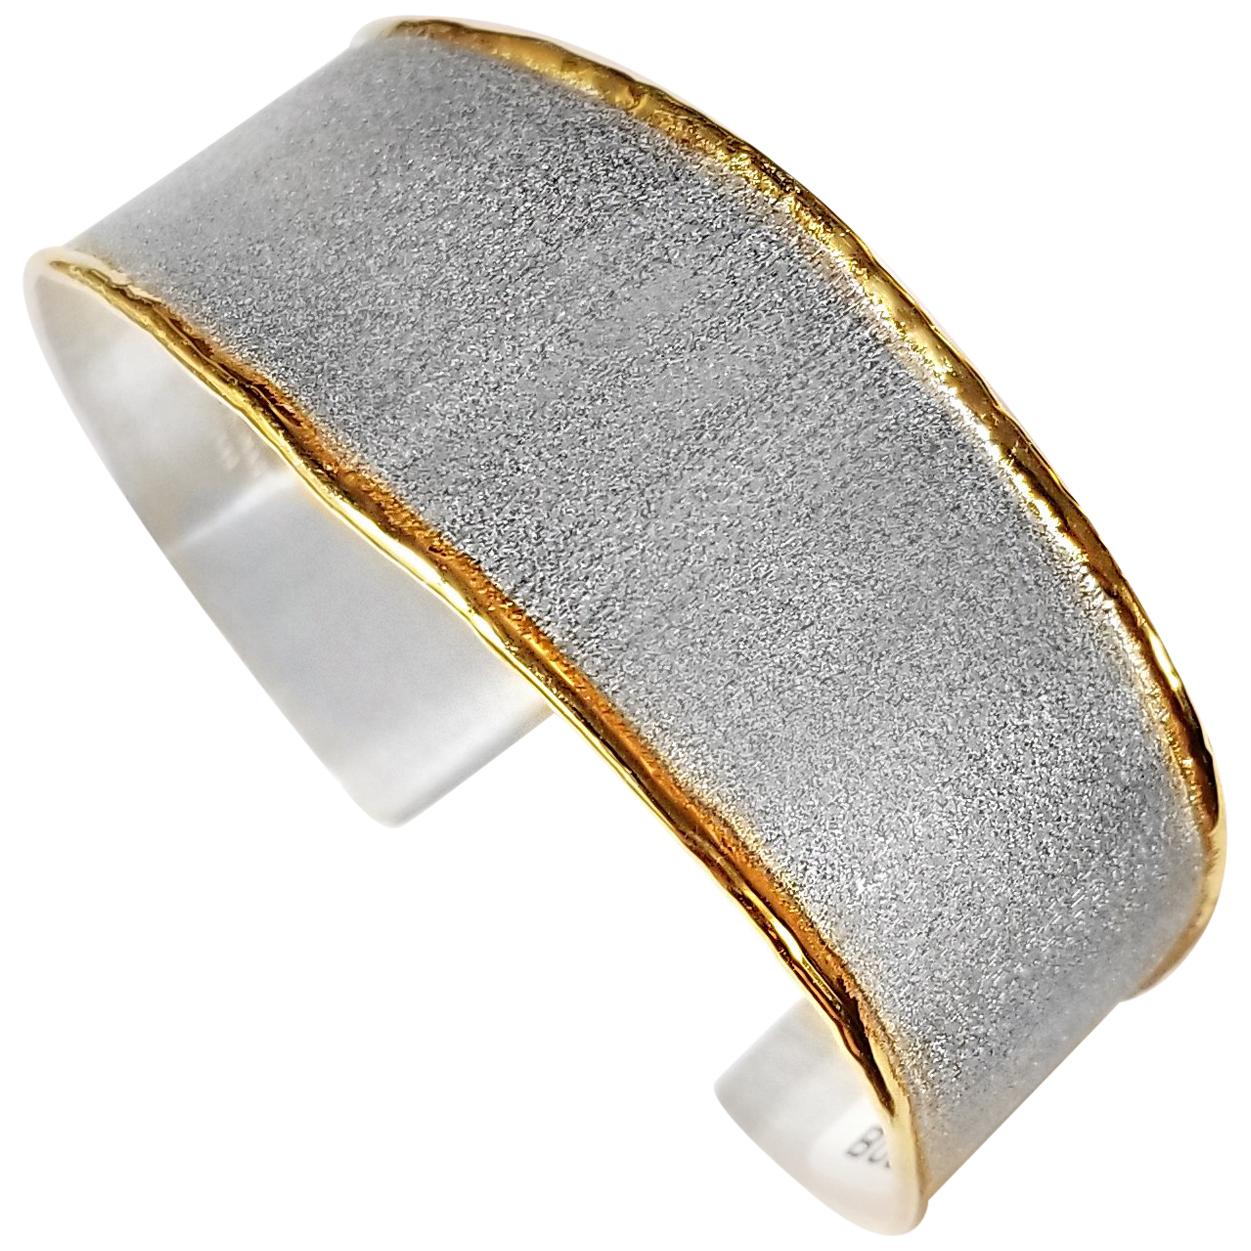 Yianni Creations Pure Style Fine Silver and 24 Karat Gold Bangle Bracelet